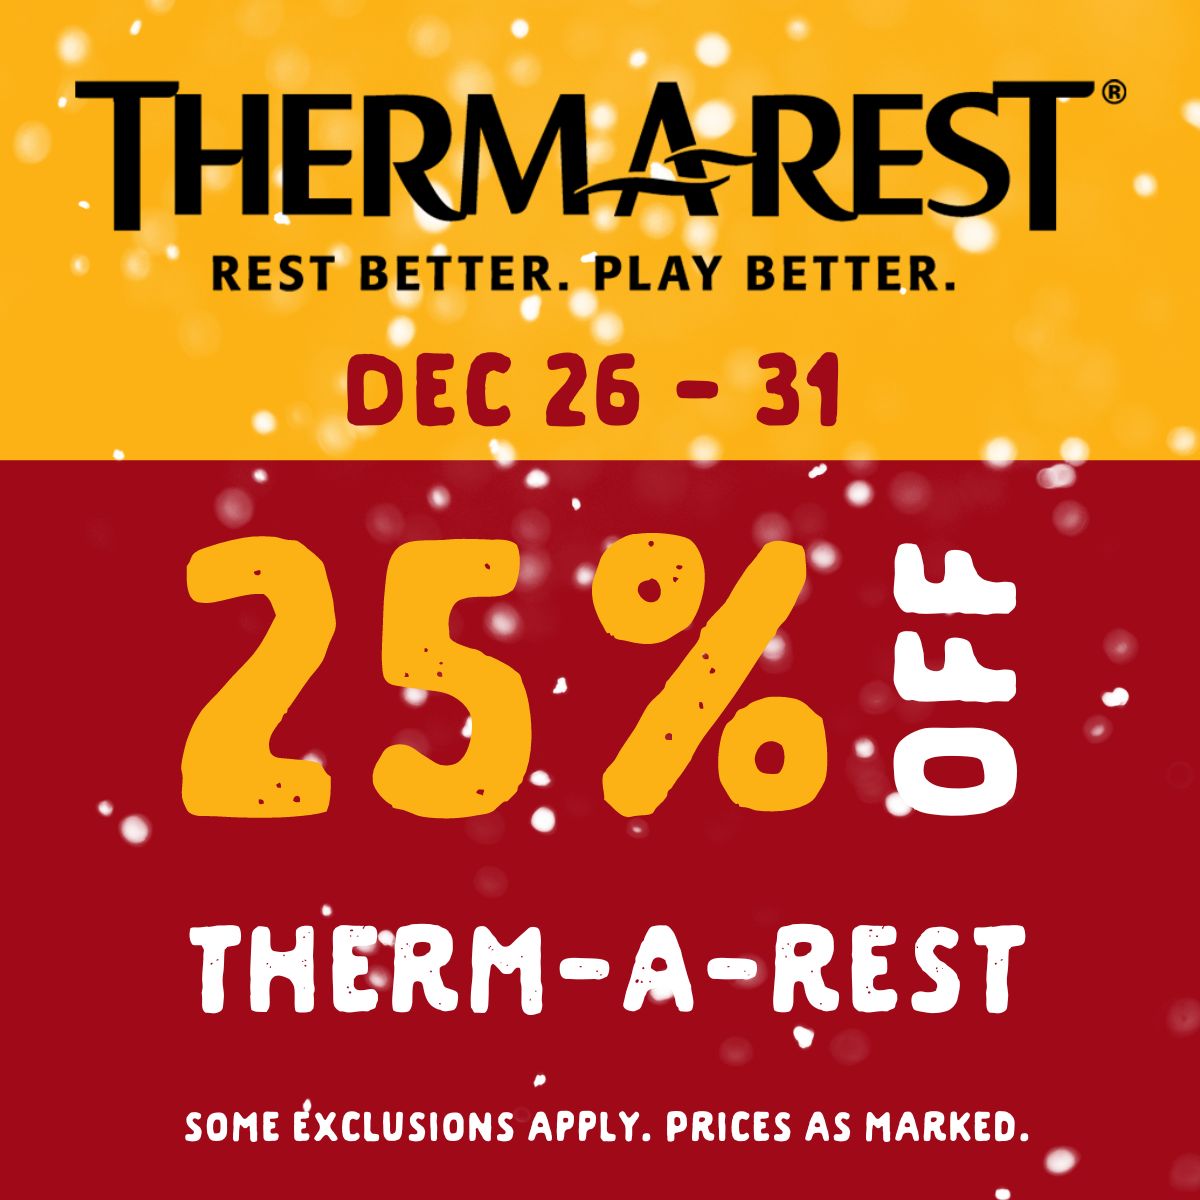 25% off Therm-A-Rest from December 26 to 31. Prices as marked on applicable products.